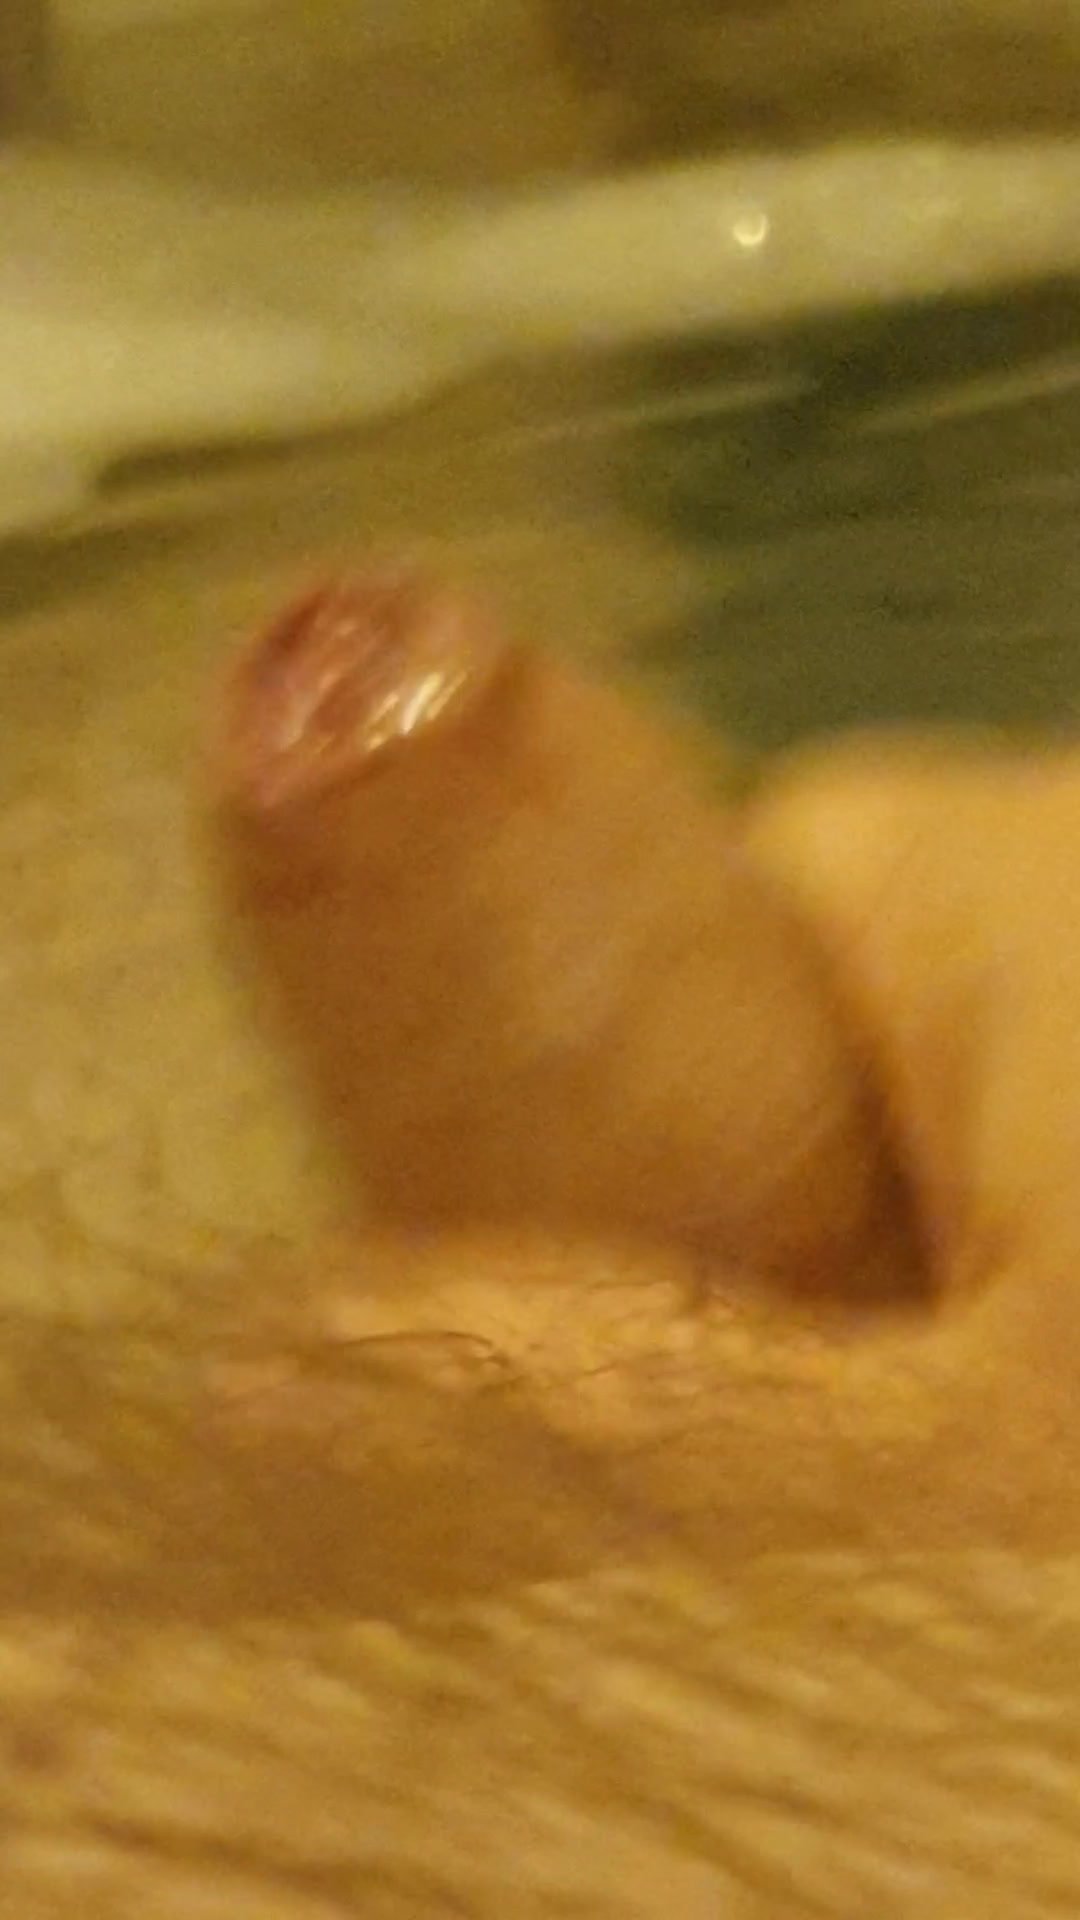 Wanking and pissing in the bath